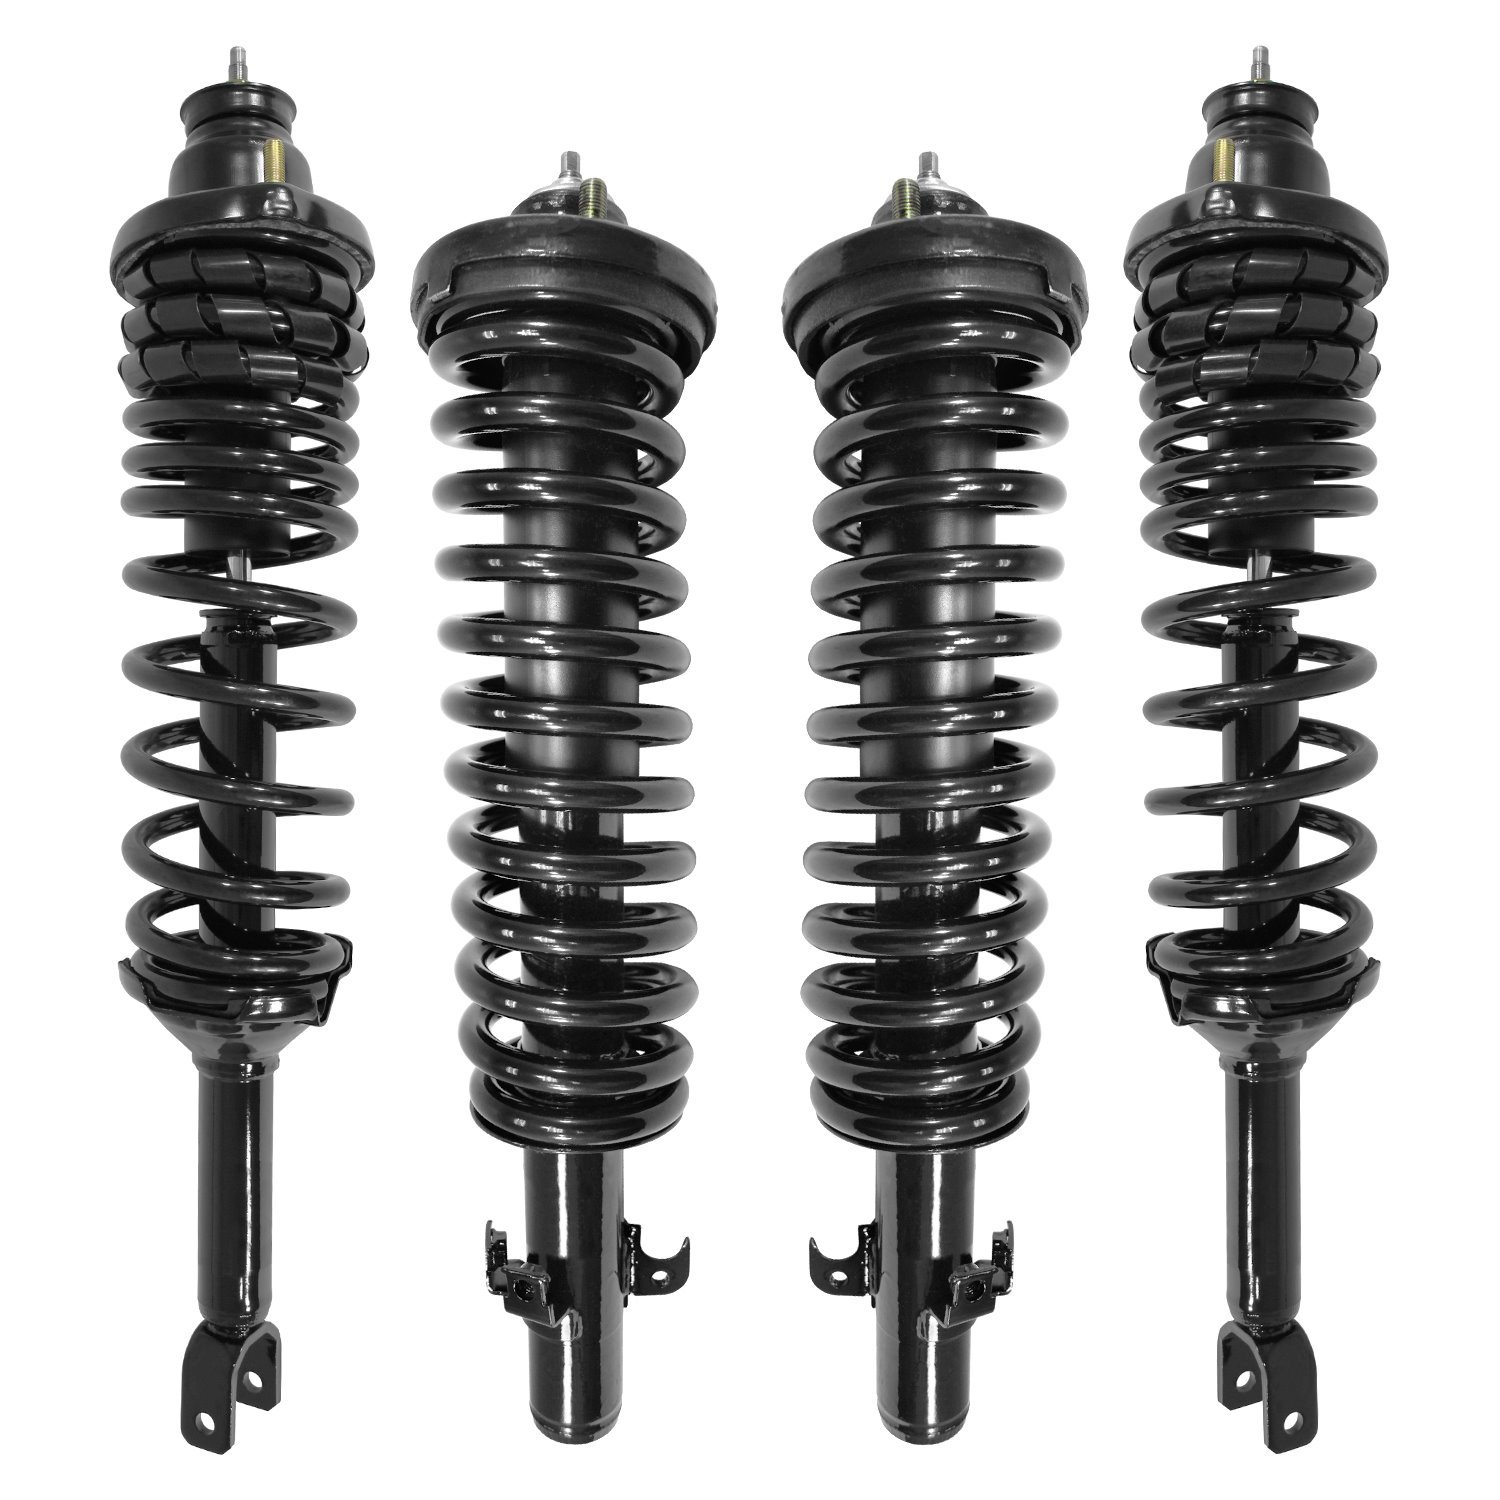 4-11140-15141-001 Front & Rear Suspension Strut & Coil Spring Assembly Kit Fits Select Honda Accord